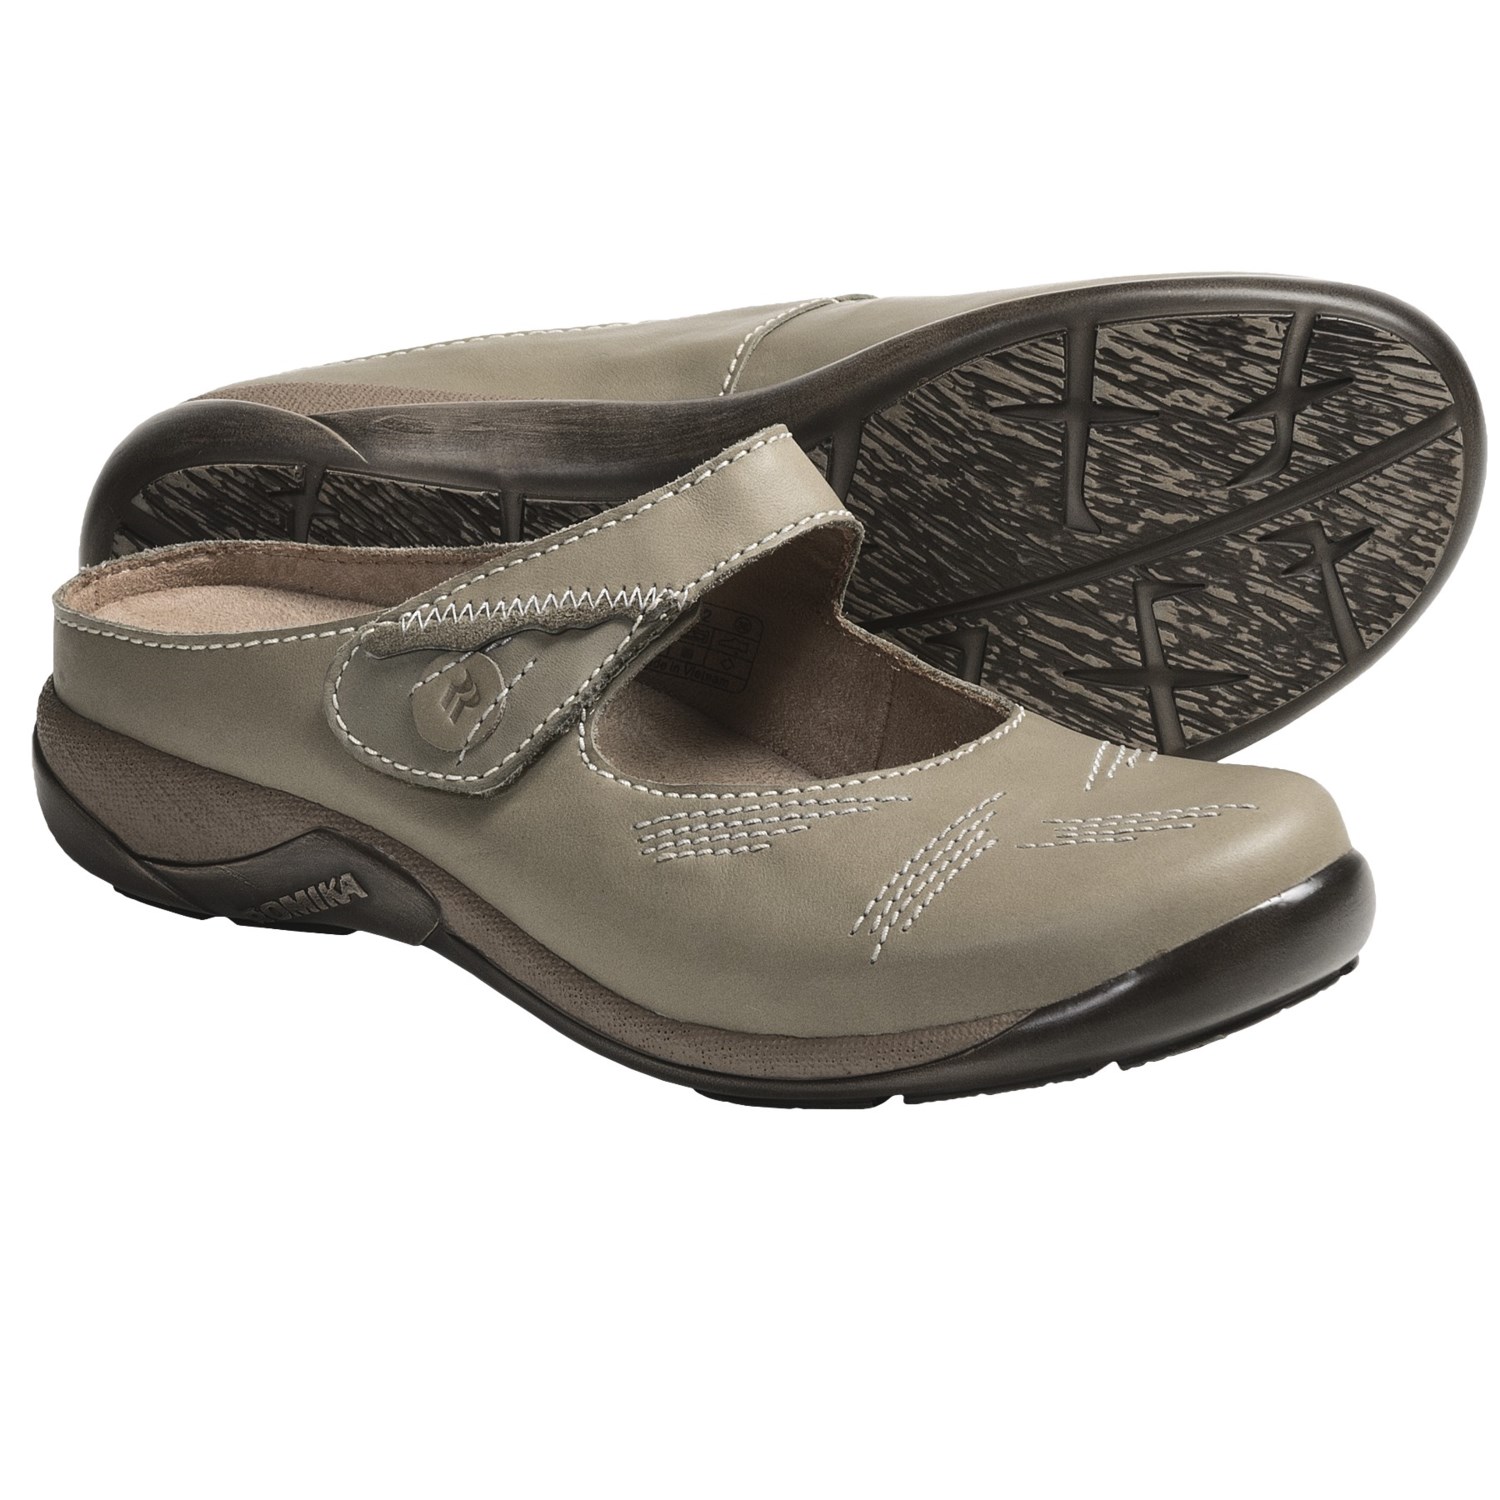 Romika Gina 02 Mary Jane Shoes (For Women) 5194C - Save 74%